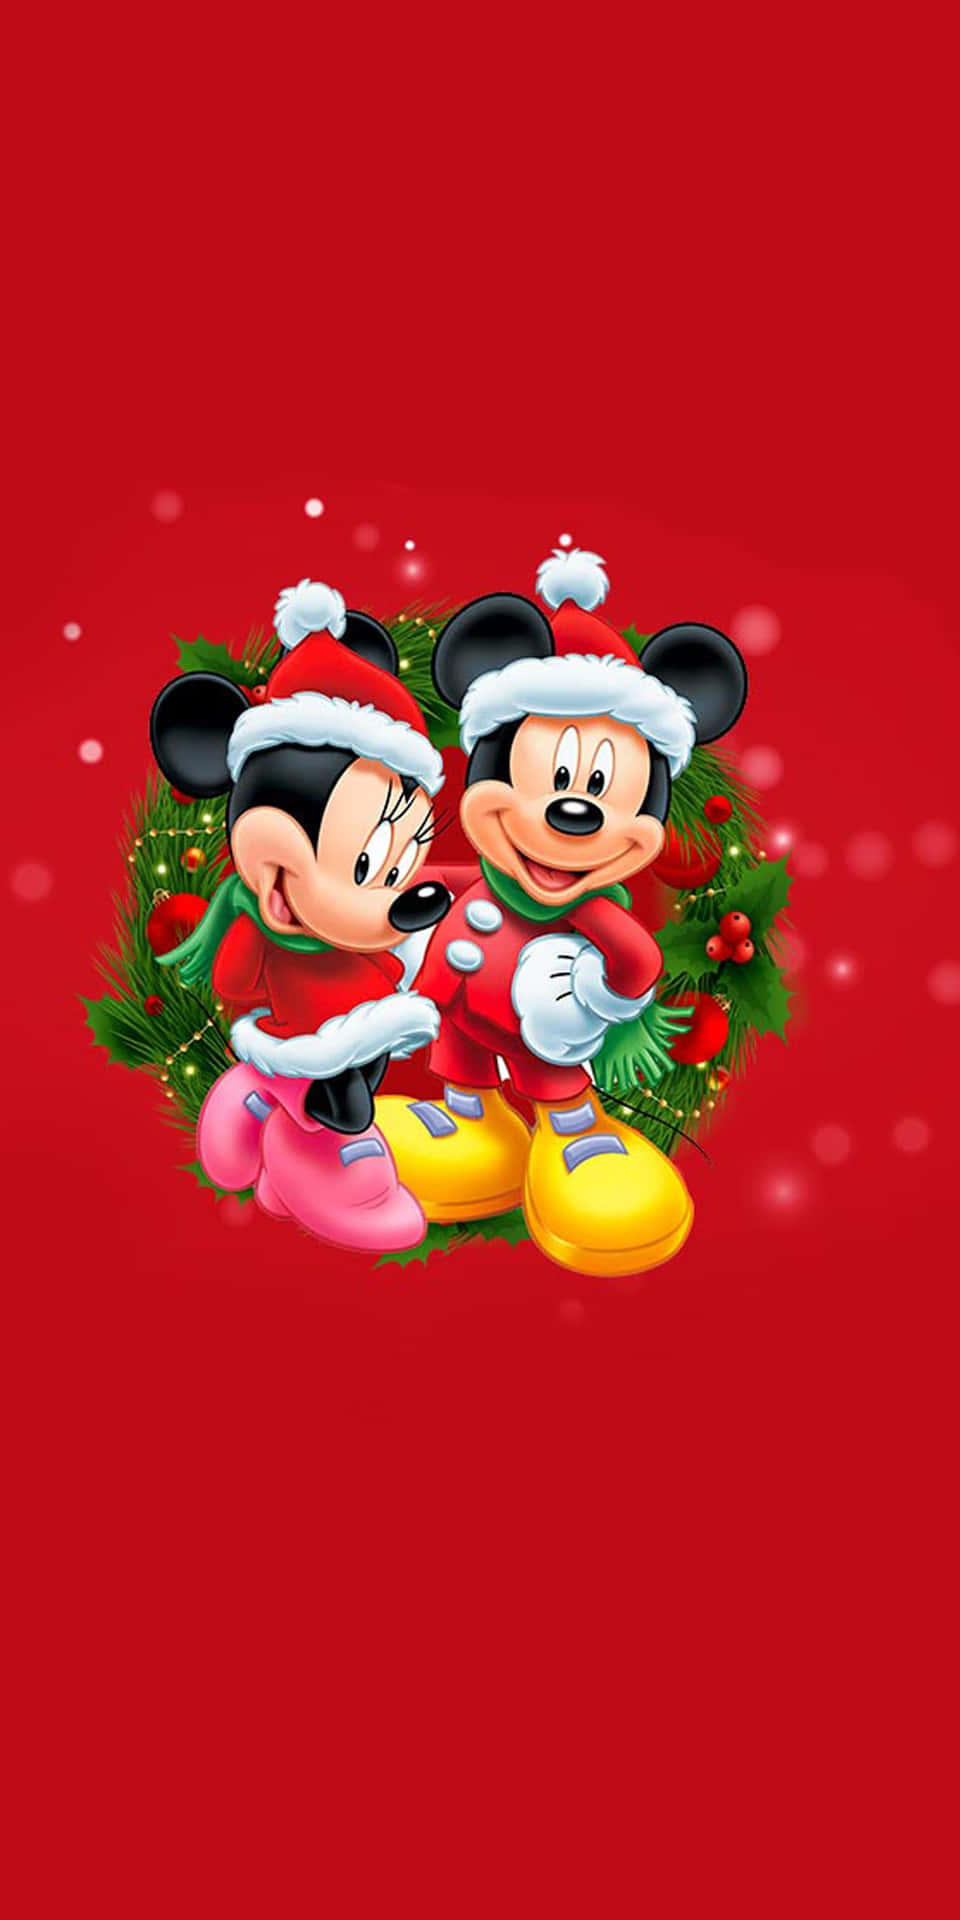 Beginning your holidays with Disney Christmas on your iPad! Wallpaper